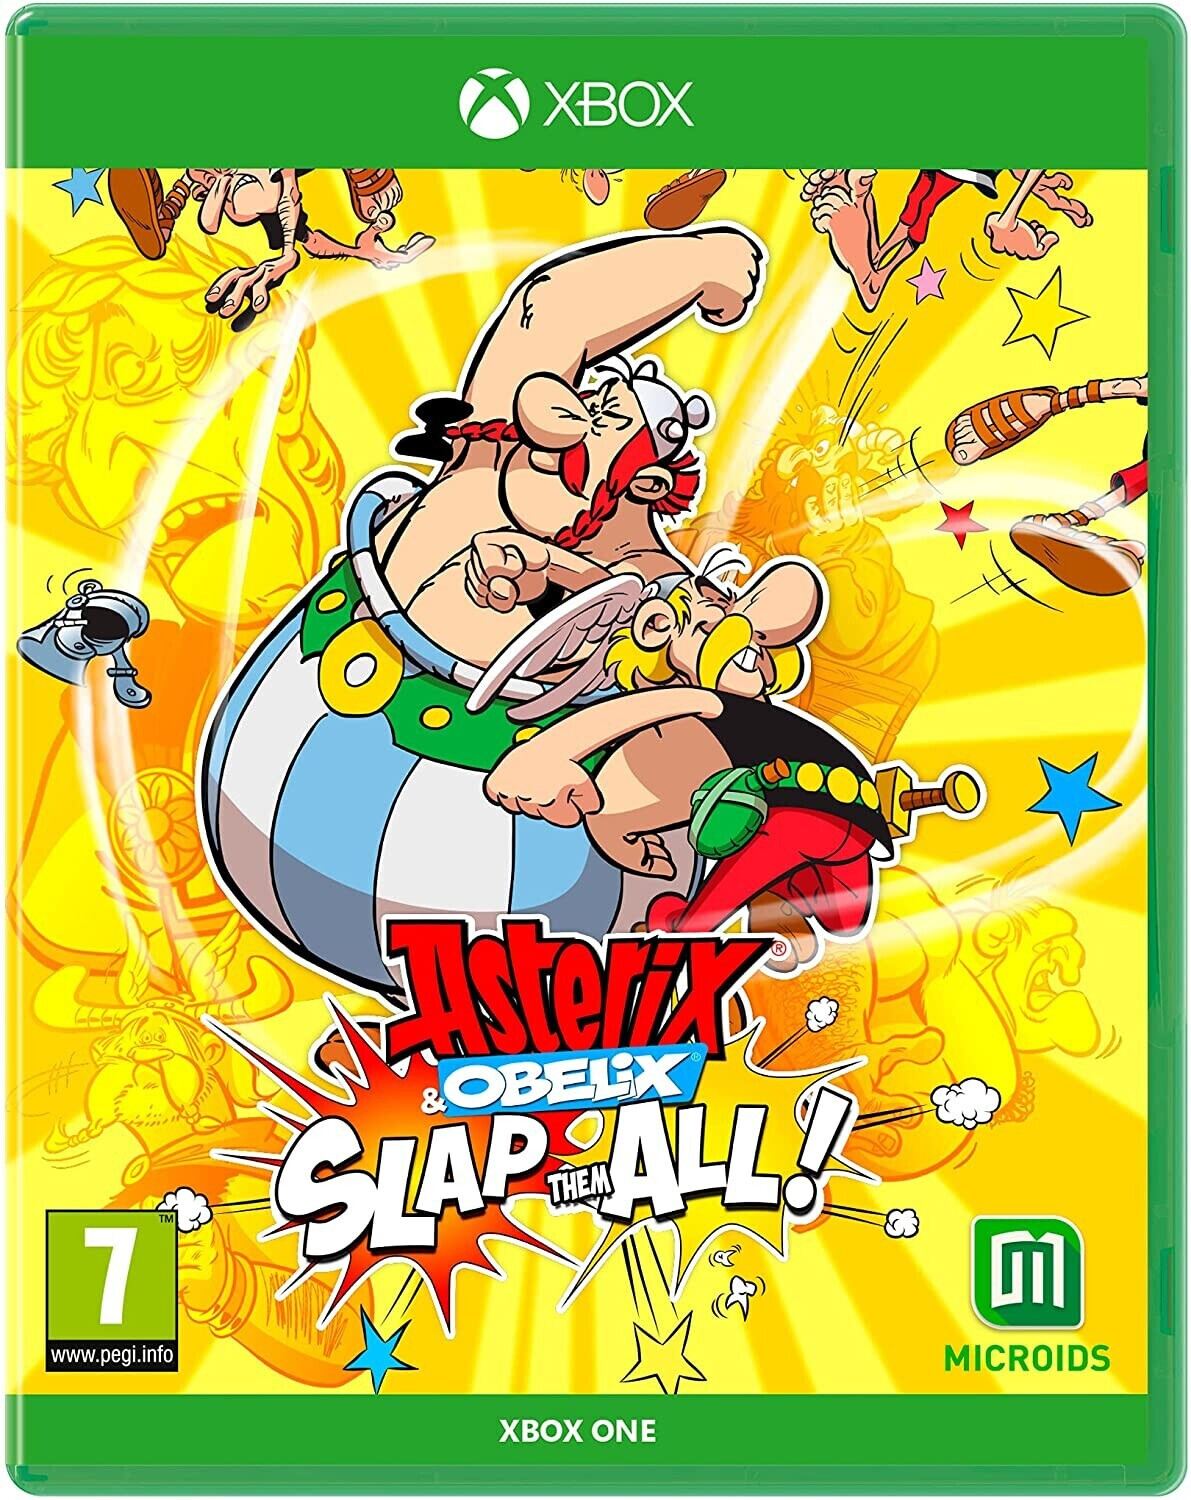 Photos - Game Microids Asterix & Obelix: Slap Them All! - Limited Edition (Xbox One)